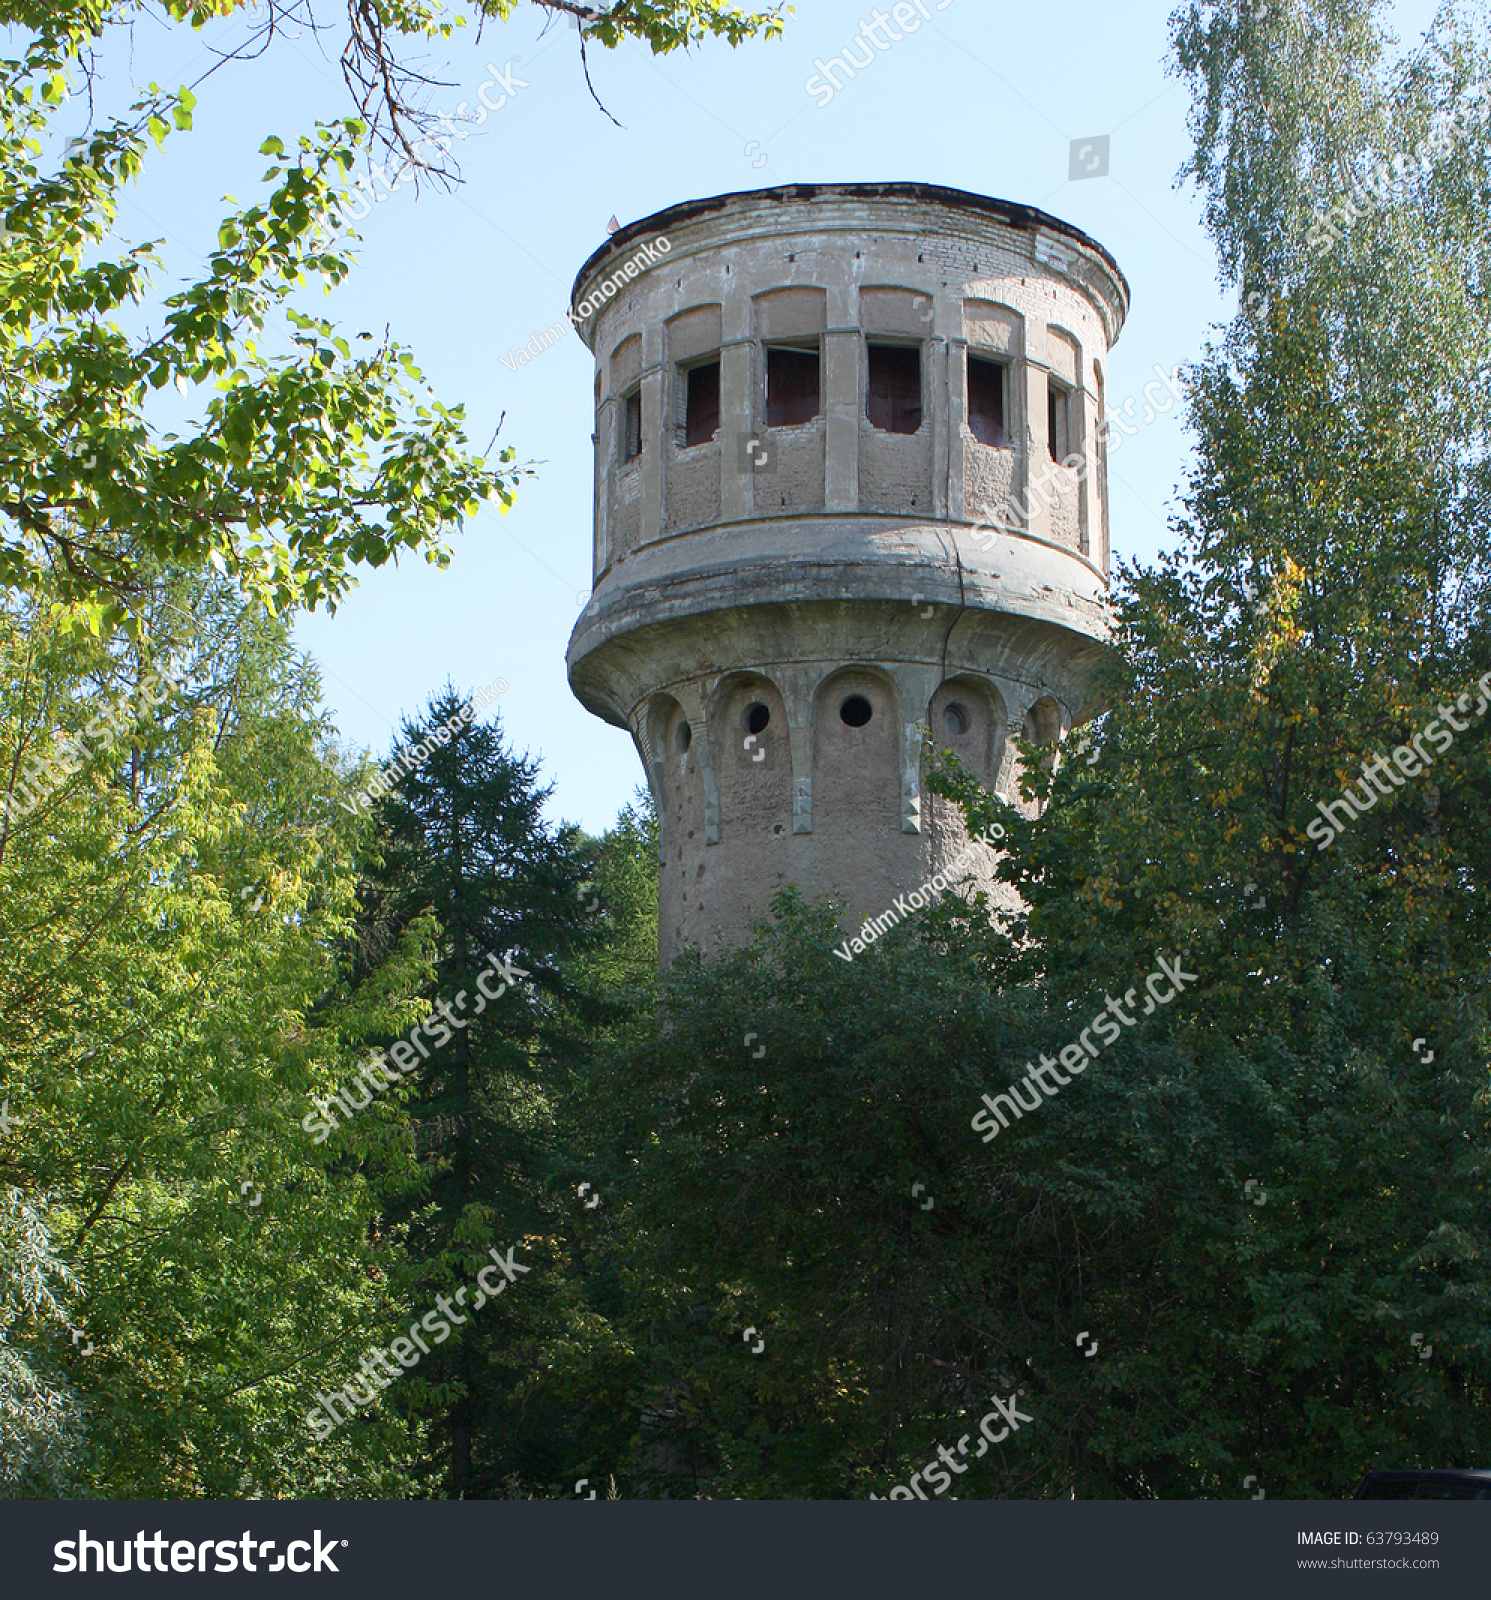 Old Tower Forest Stock Photo (Royalty Free) 63793489 - Shutterstock